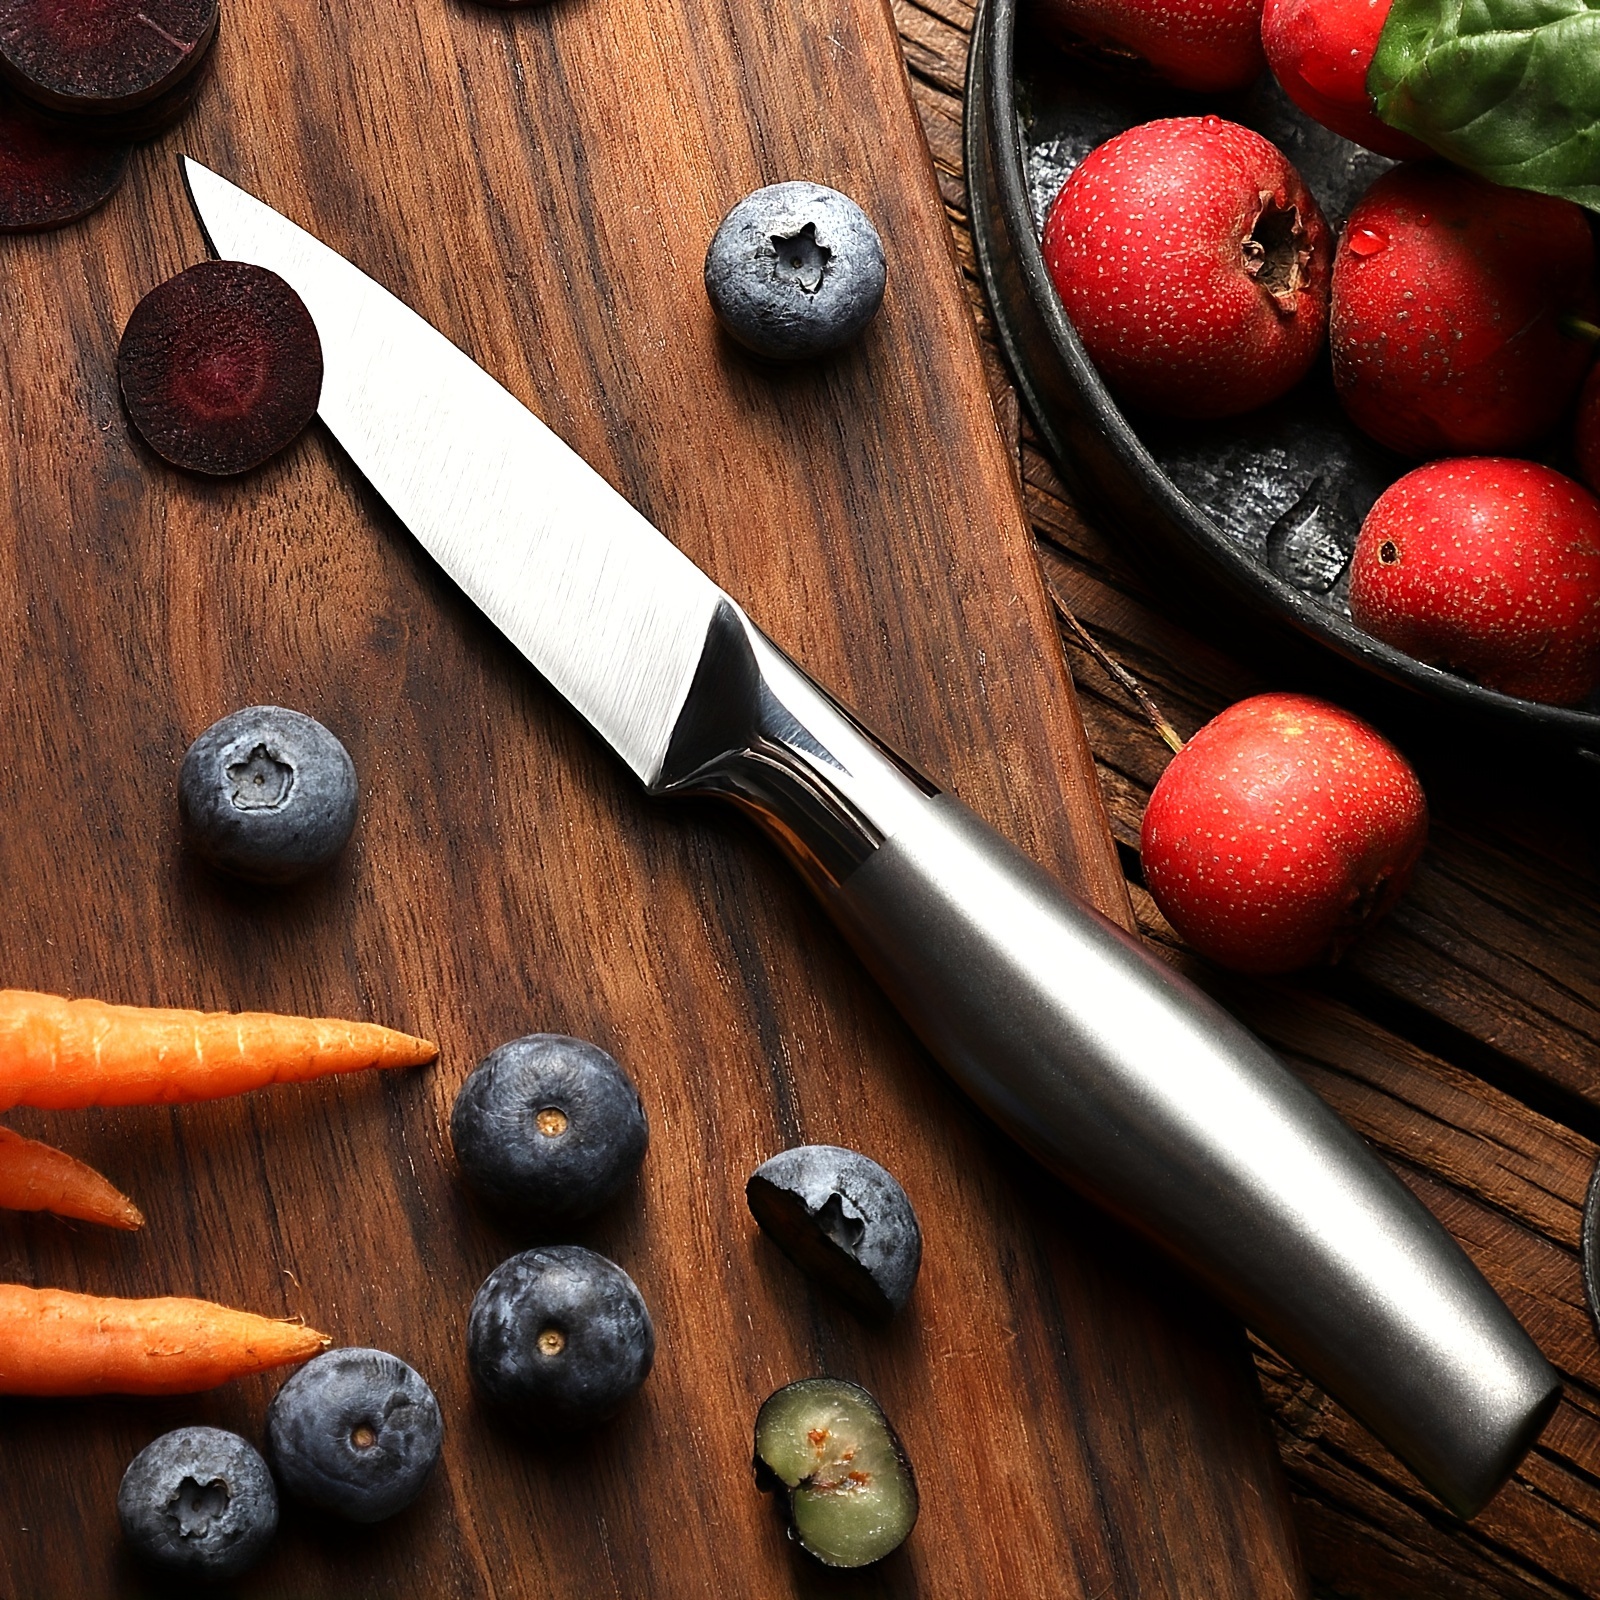 

Pearing Knife 3.5 Inch Fruit Knife Professional Kitchen Peel Knives Utility Knife, 5cr15mov German High Carbon Stainless Steel Chefs Knife Razor Sharp With Ergonomic Handle